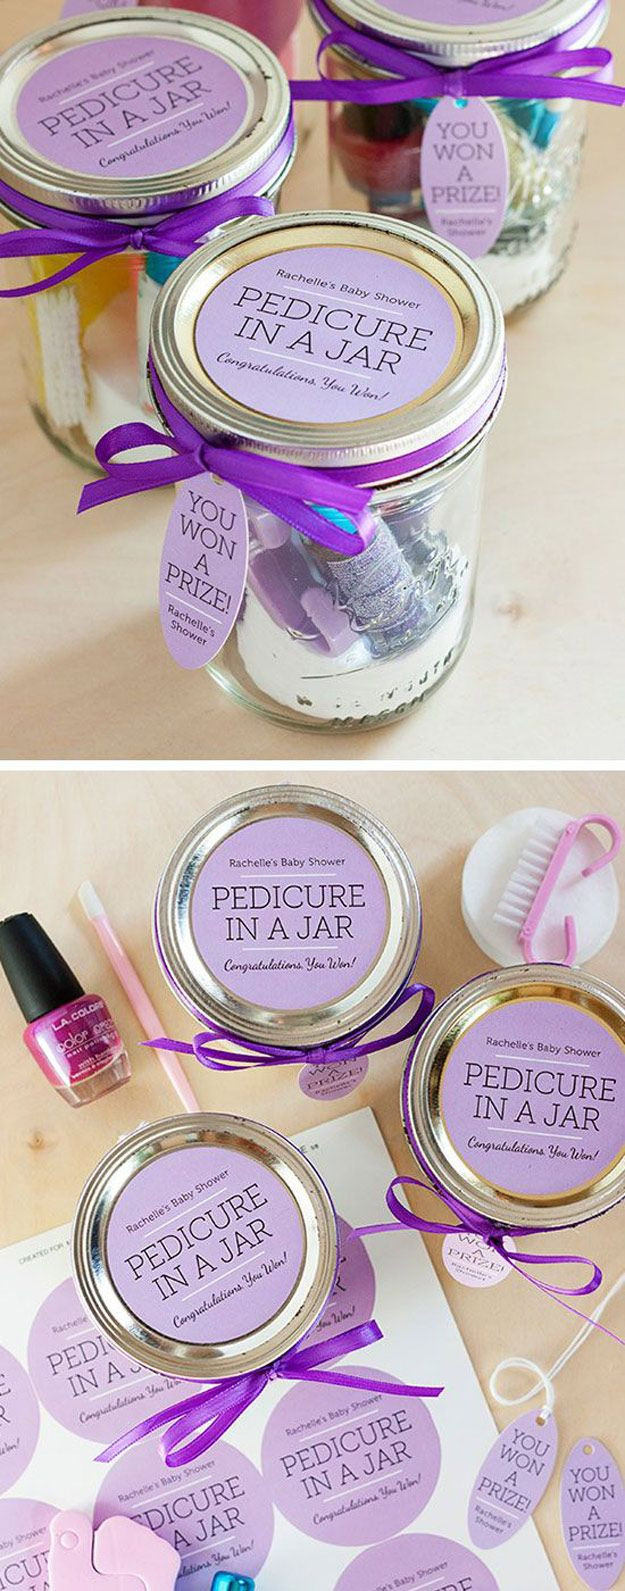 Last Minute DIY Gifts For Mom
 53 Gifts In A Jar